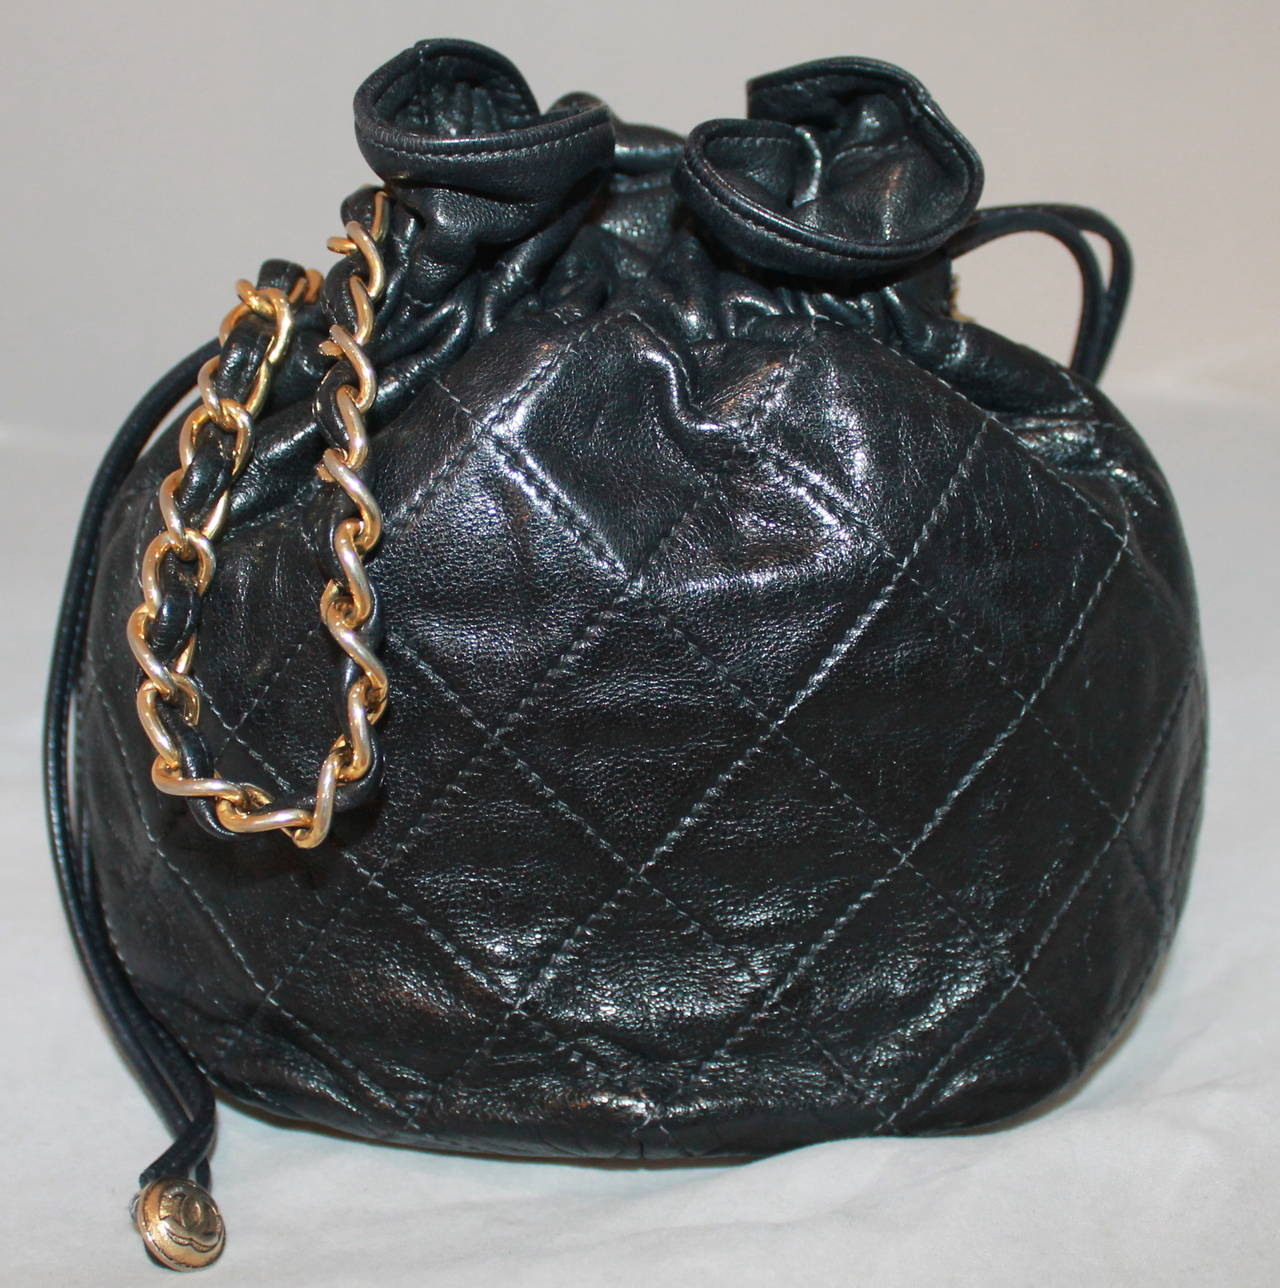 Chanel Black Lambskin Quilted Mini Drawstring Handbag - circa 1997. This handbag is in impeccable condition with no markings. Comes with duster. 6